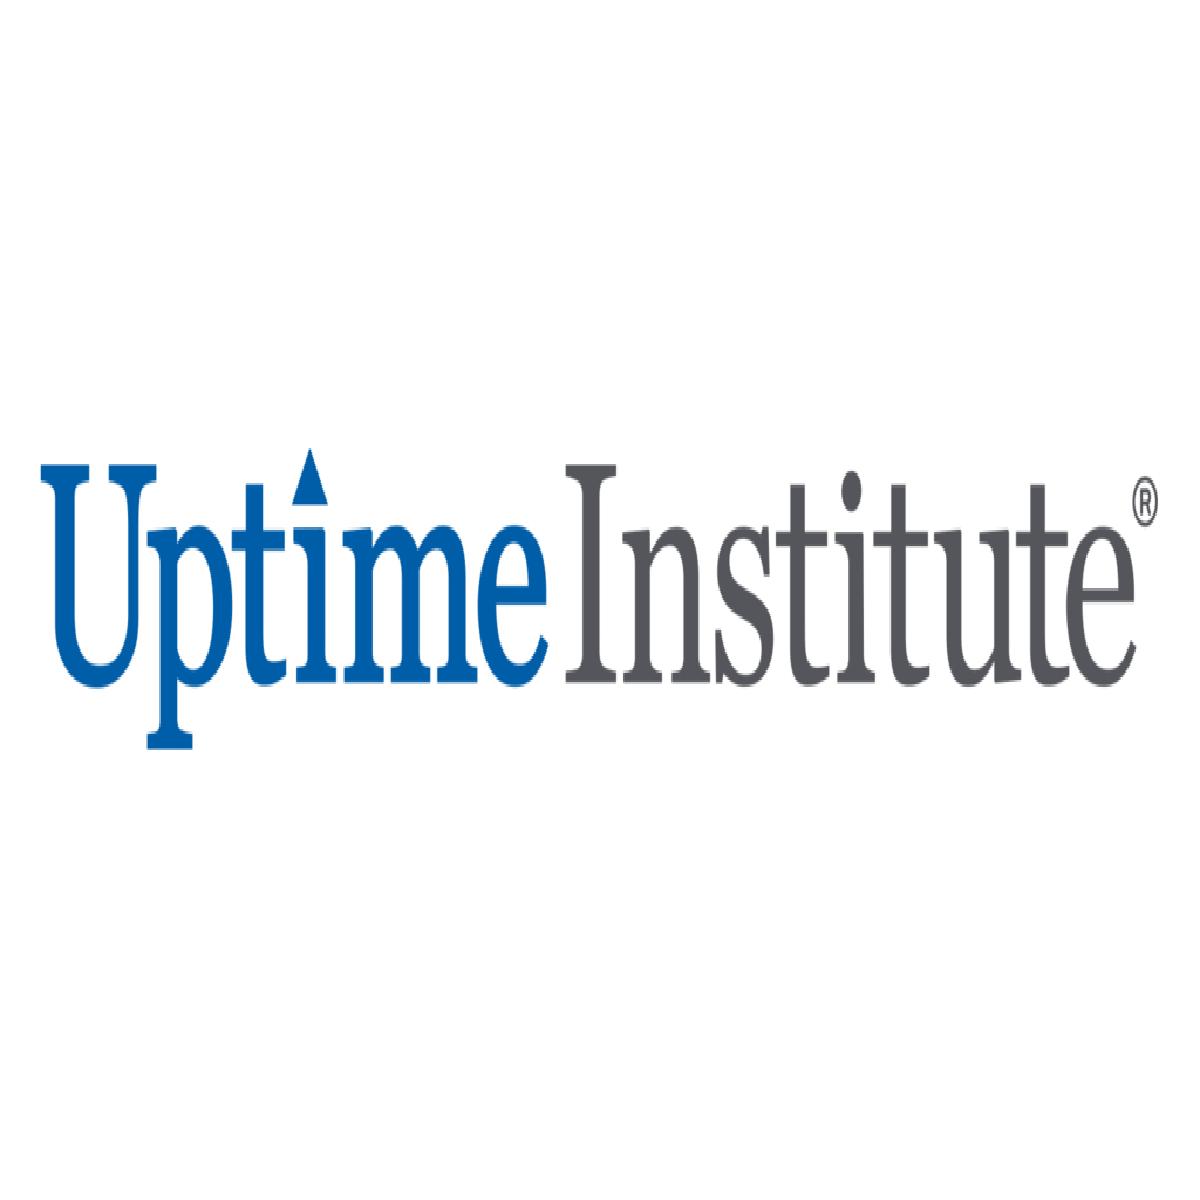 Uptime Institute’s 2022 Global Data Center Survey Reveals Strong Industry Growth as Operators Brace for Expanding Sustainability Requirements